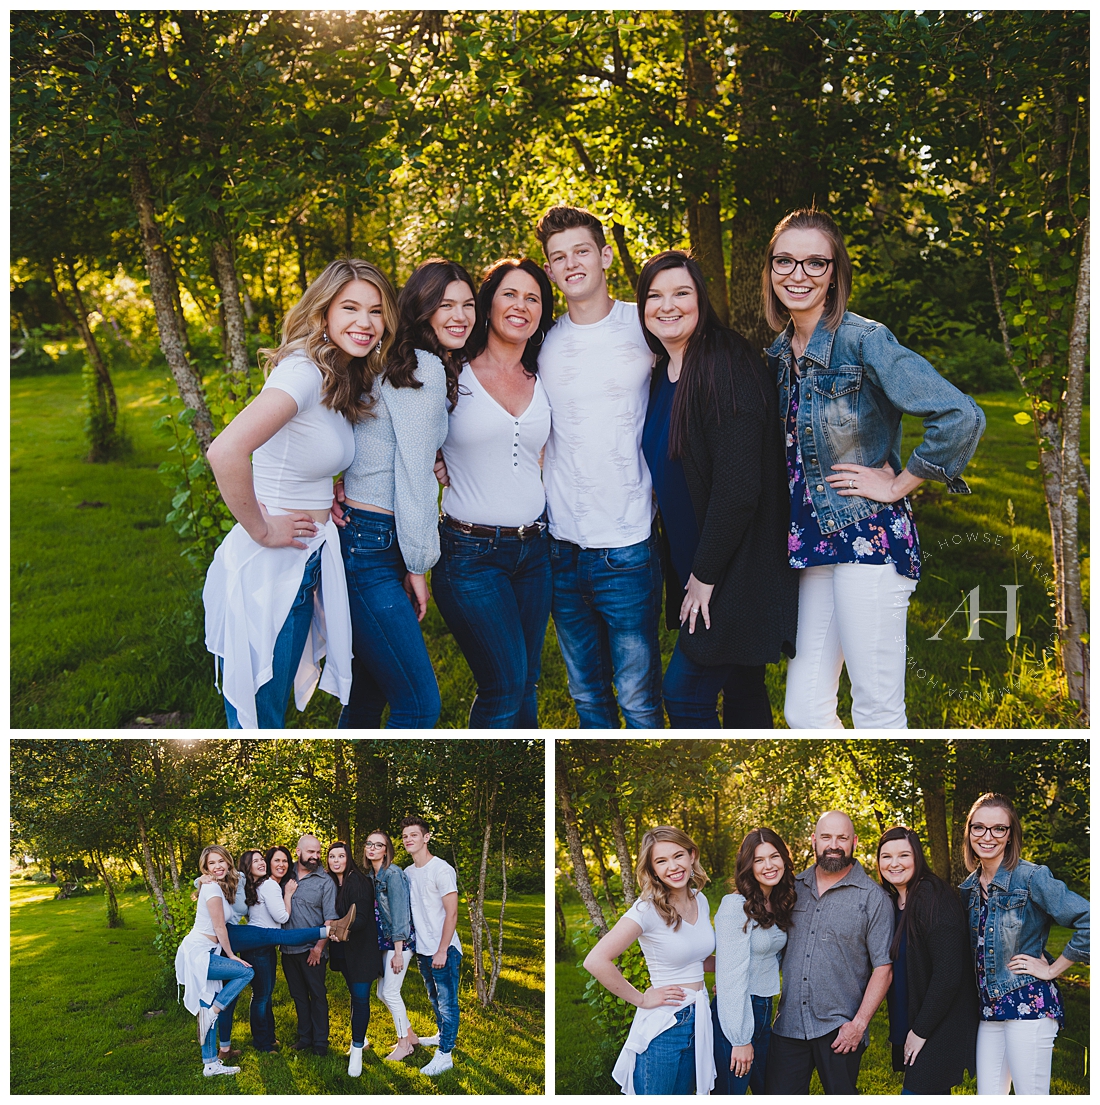 Sibling Portraits in Tacoma | Summer Outfits, Summer Light, Jeans and White T-Shirts, What to Wear, Poses for Young Families | Photographed by Tacoma Senior Photographer Amanda Howse